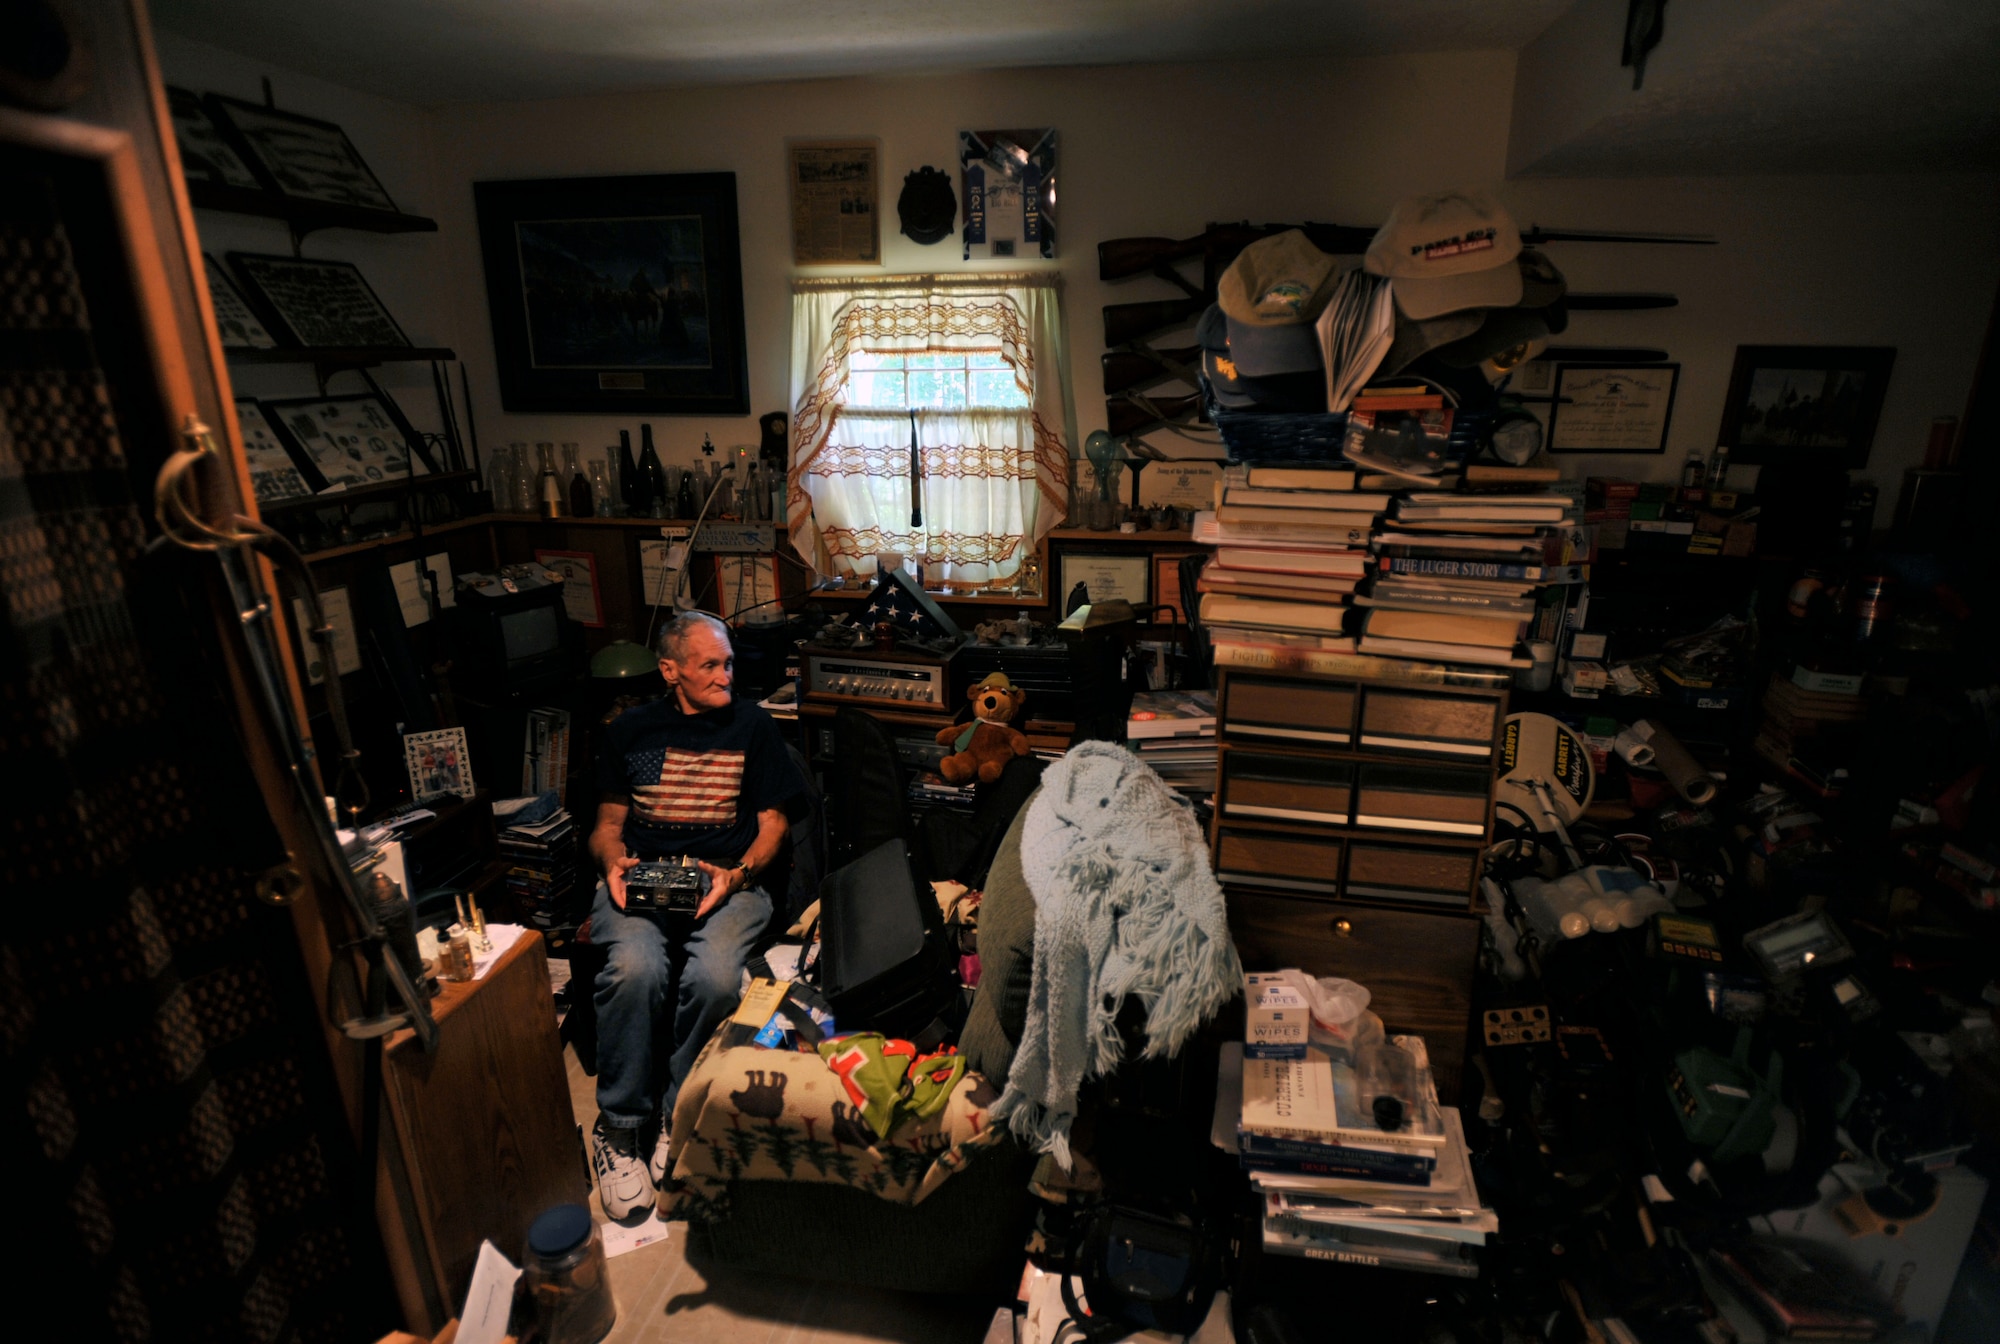 Retired U.S. Army Maj. E. Vernon Smith Jr. sits in his home in central Virginia among his collection of books, cameras and military memorabilia, July 20, 2013. Smith was stationed roughly 15 miles south of 38th parallel in Korea in support of the Korean Armistice Agreement signed July 27, 1953, ending the war between North and South Korea. (U.S. Air Force photo by Staff Sgt. Katie Gar Ward/Released) 